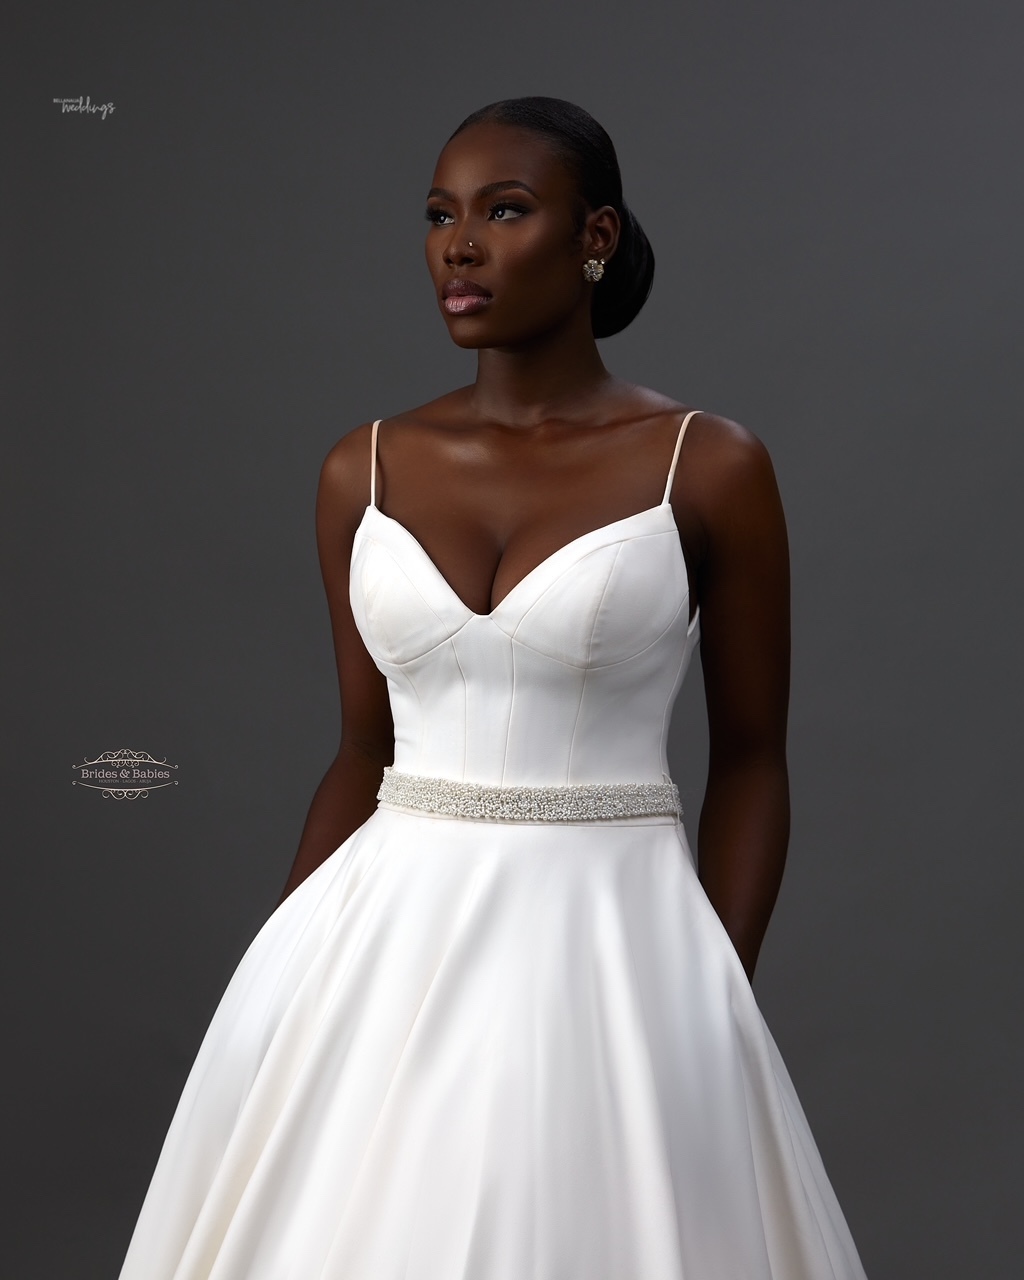 Looking for a Wedding Dress that will make you stand out? Check out this Primrose Bridal Collection that will blow your mind